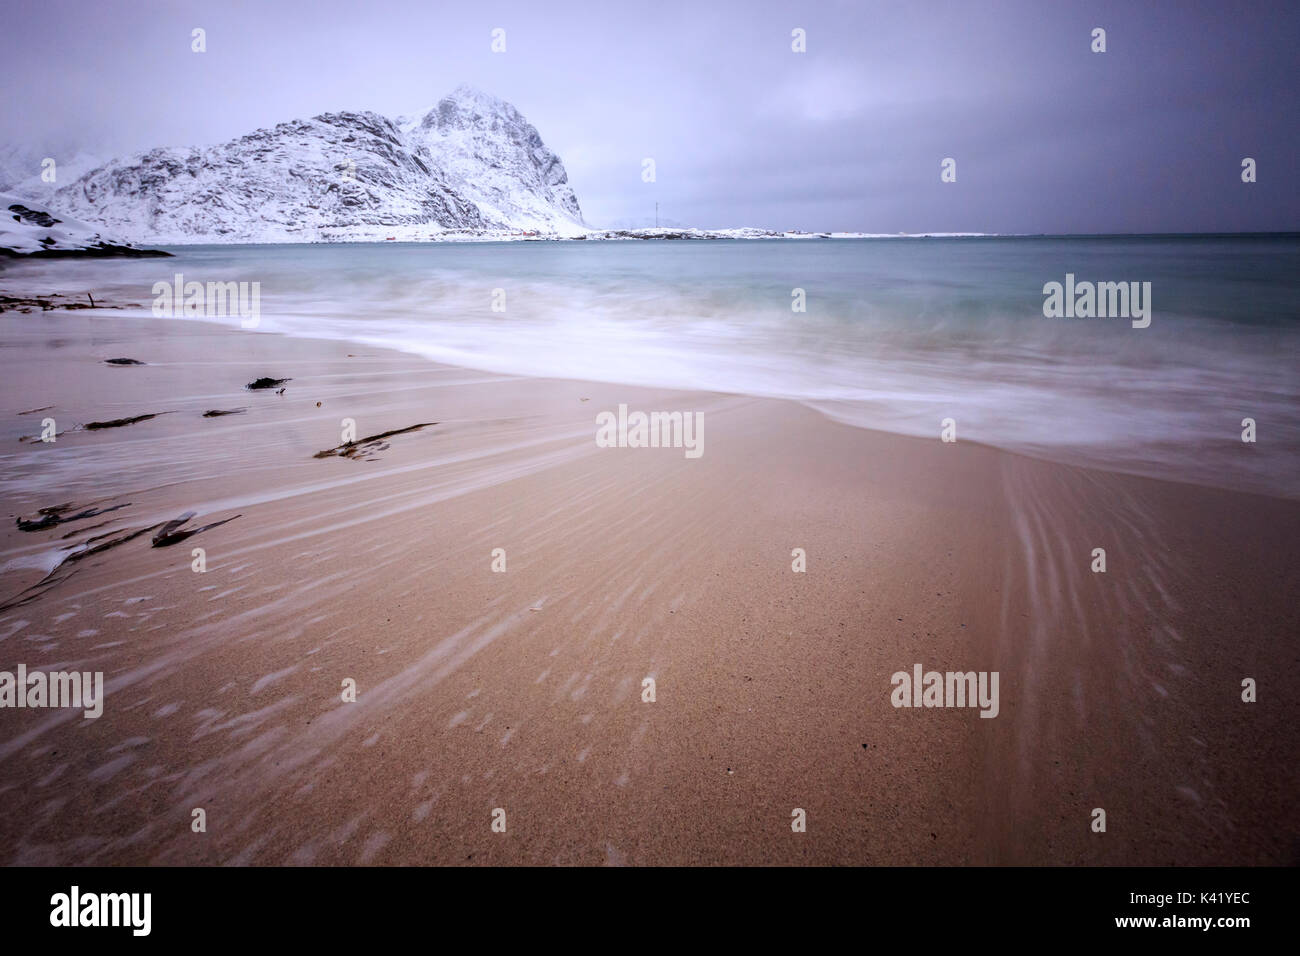 Waves of the icy sea on the beach in the background the snowy peaks Pollen Vareid Flakstad Lofoten Islands Norway Europe Stock Photo